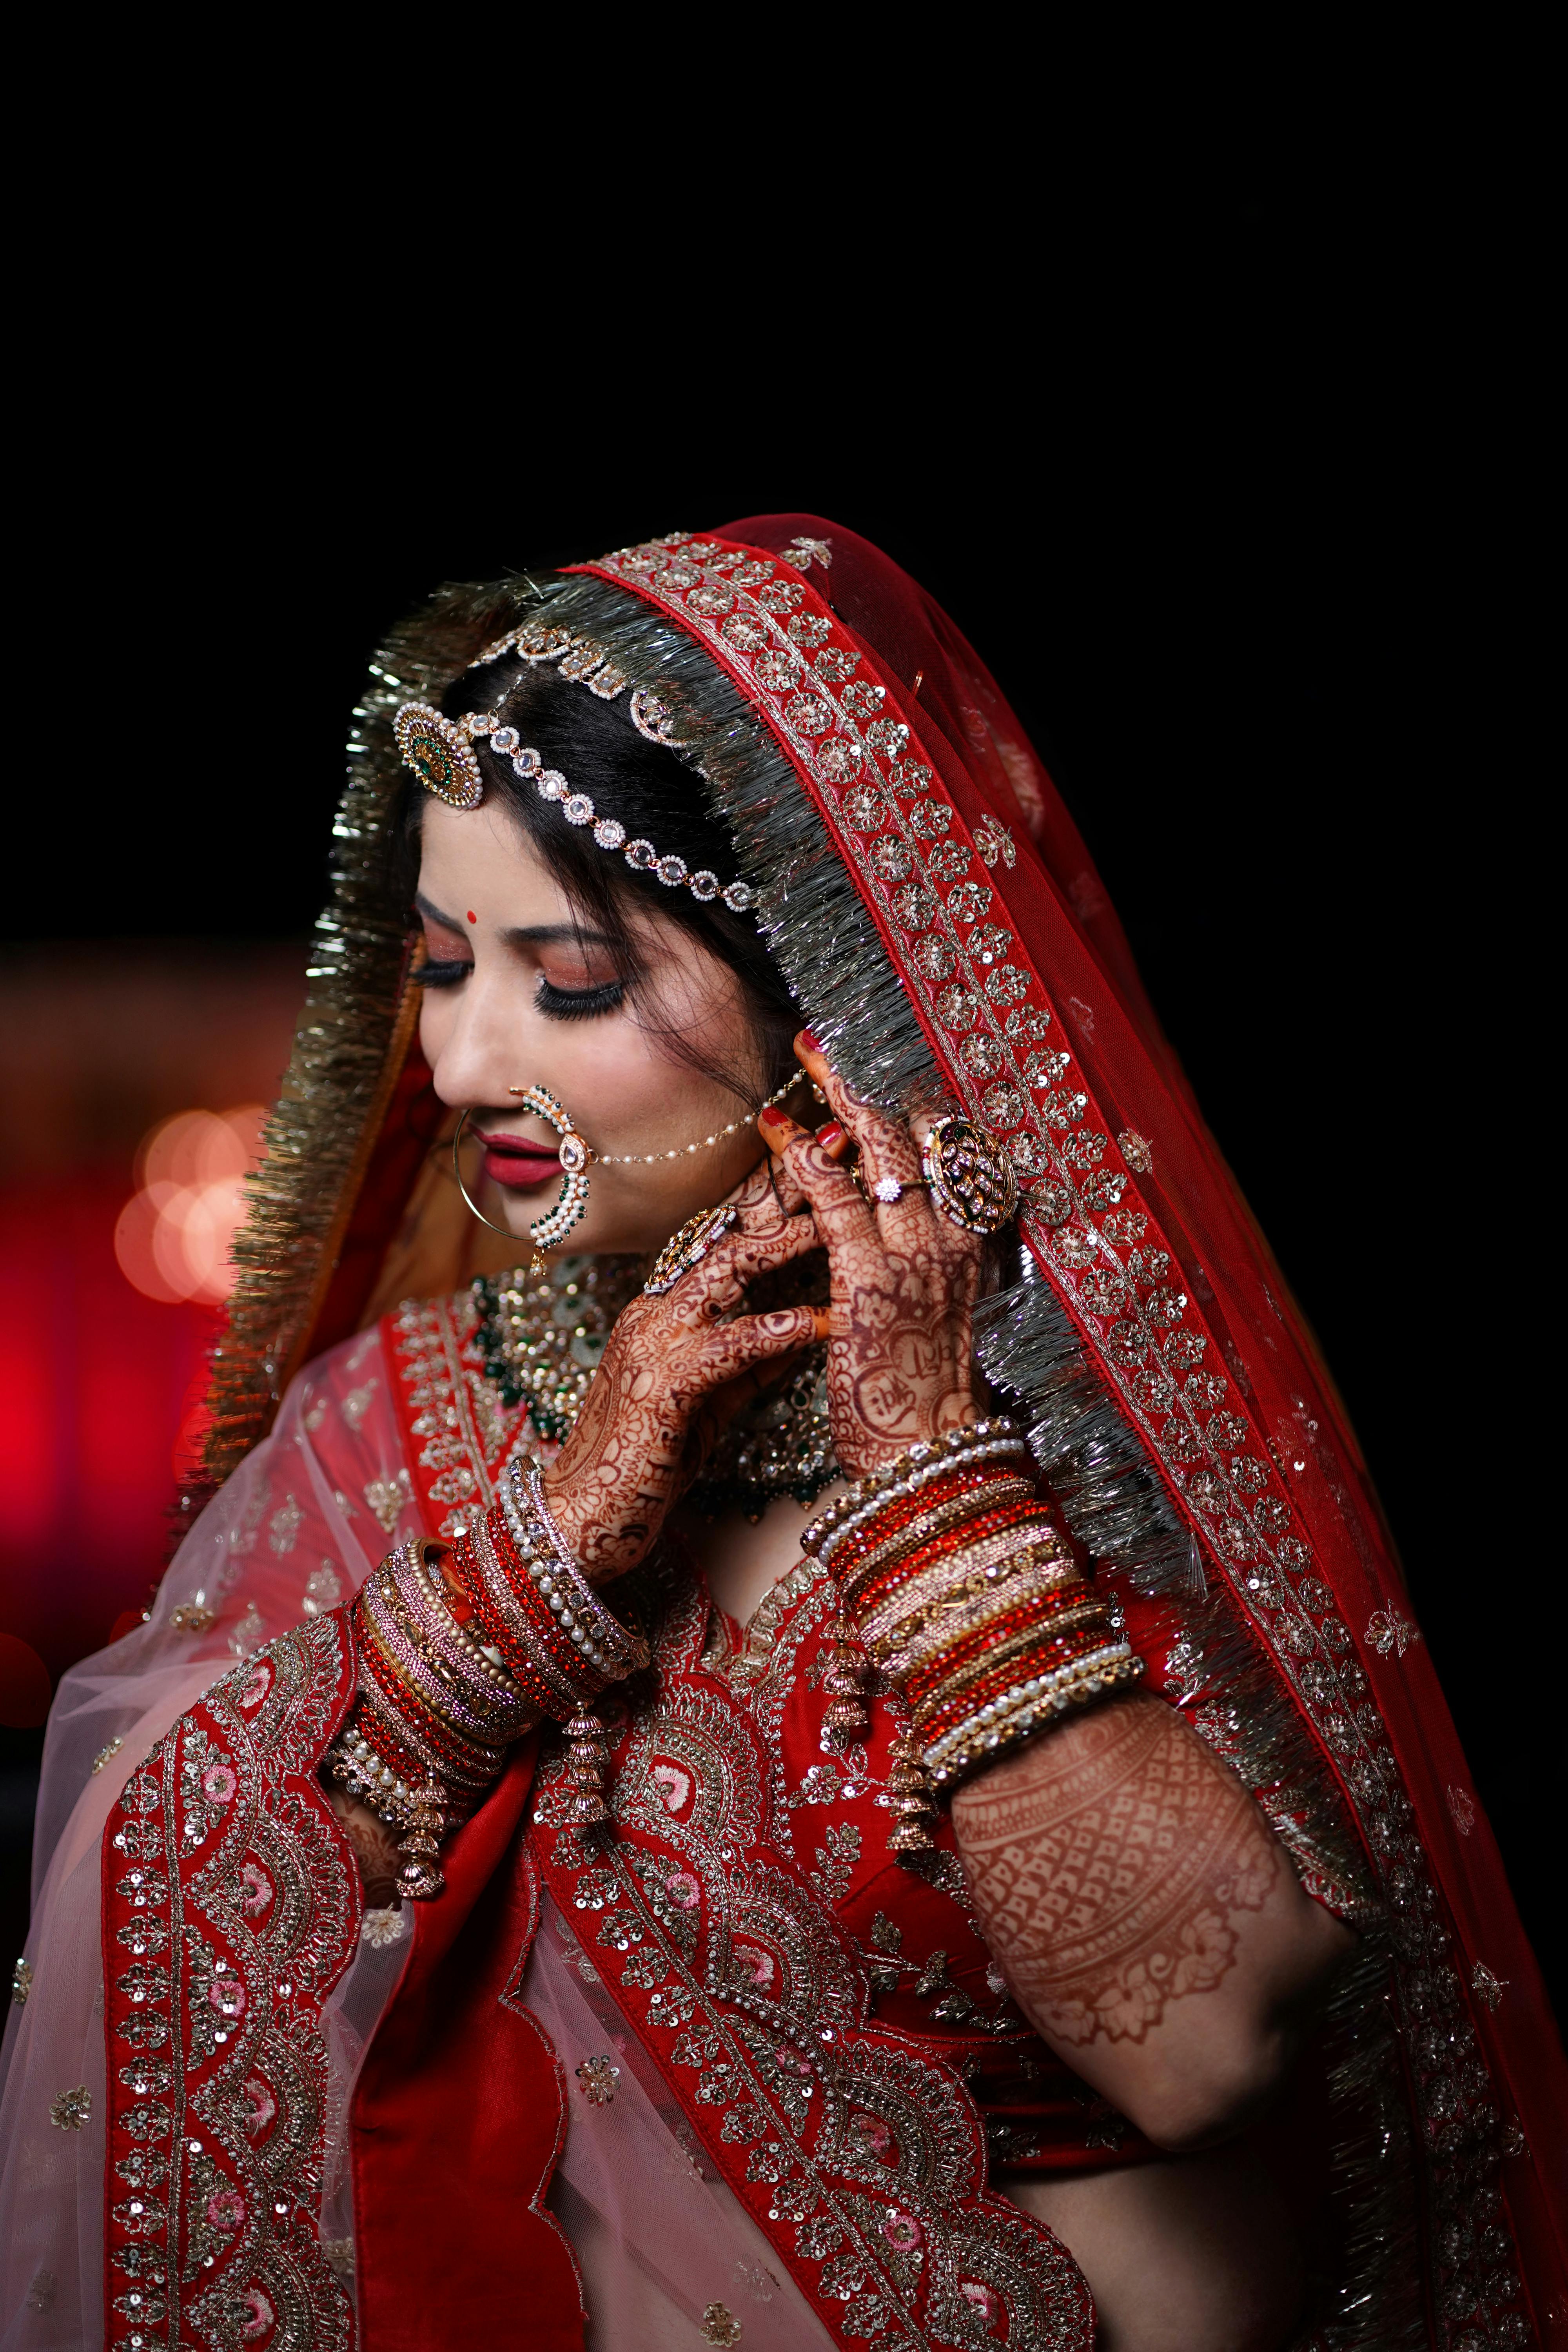 free photo of photo of an indian bride in traditional clothing